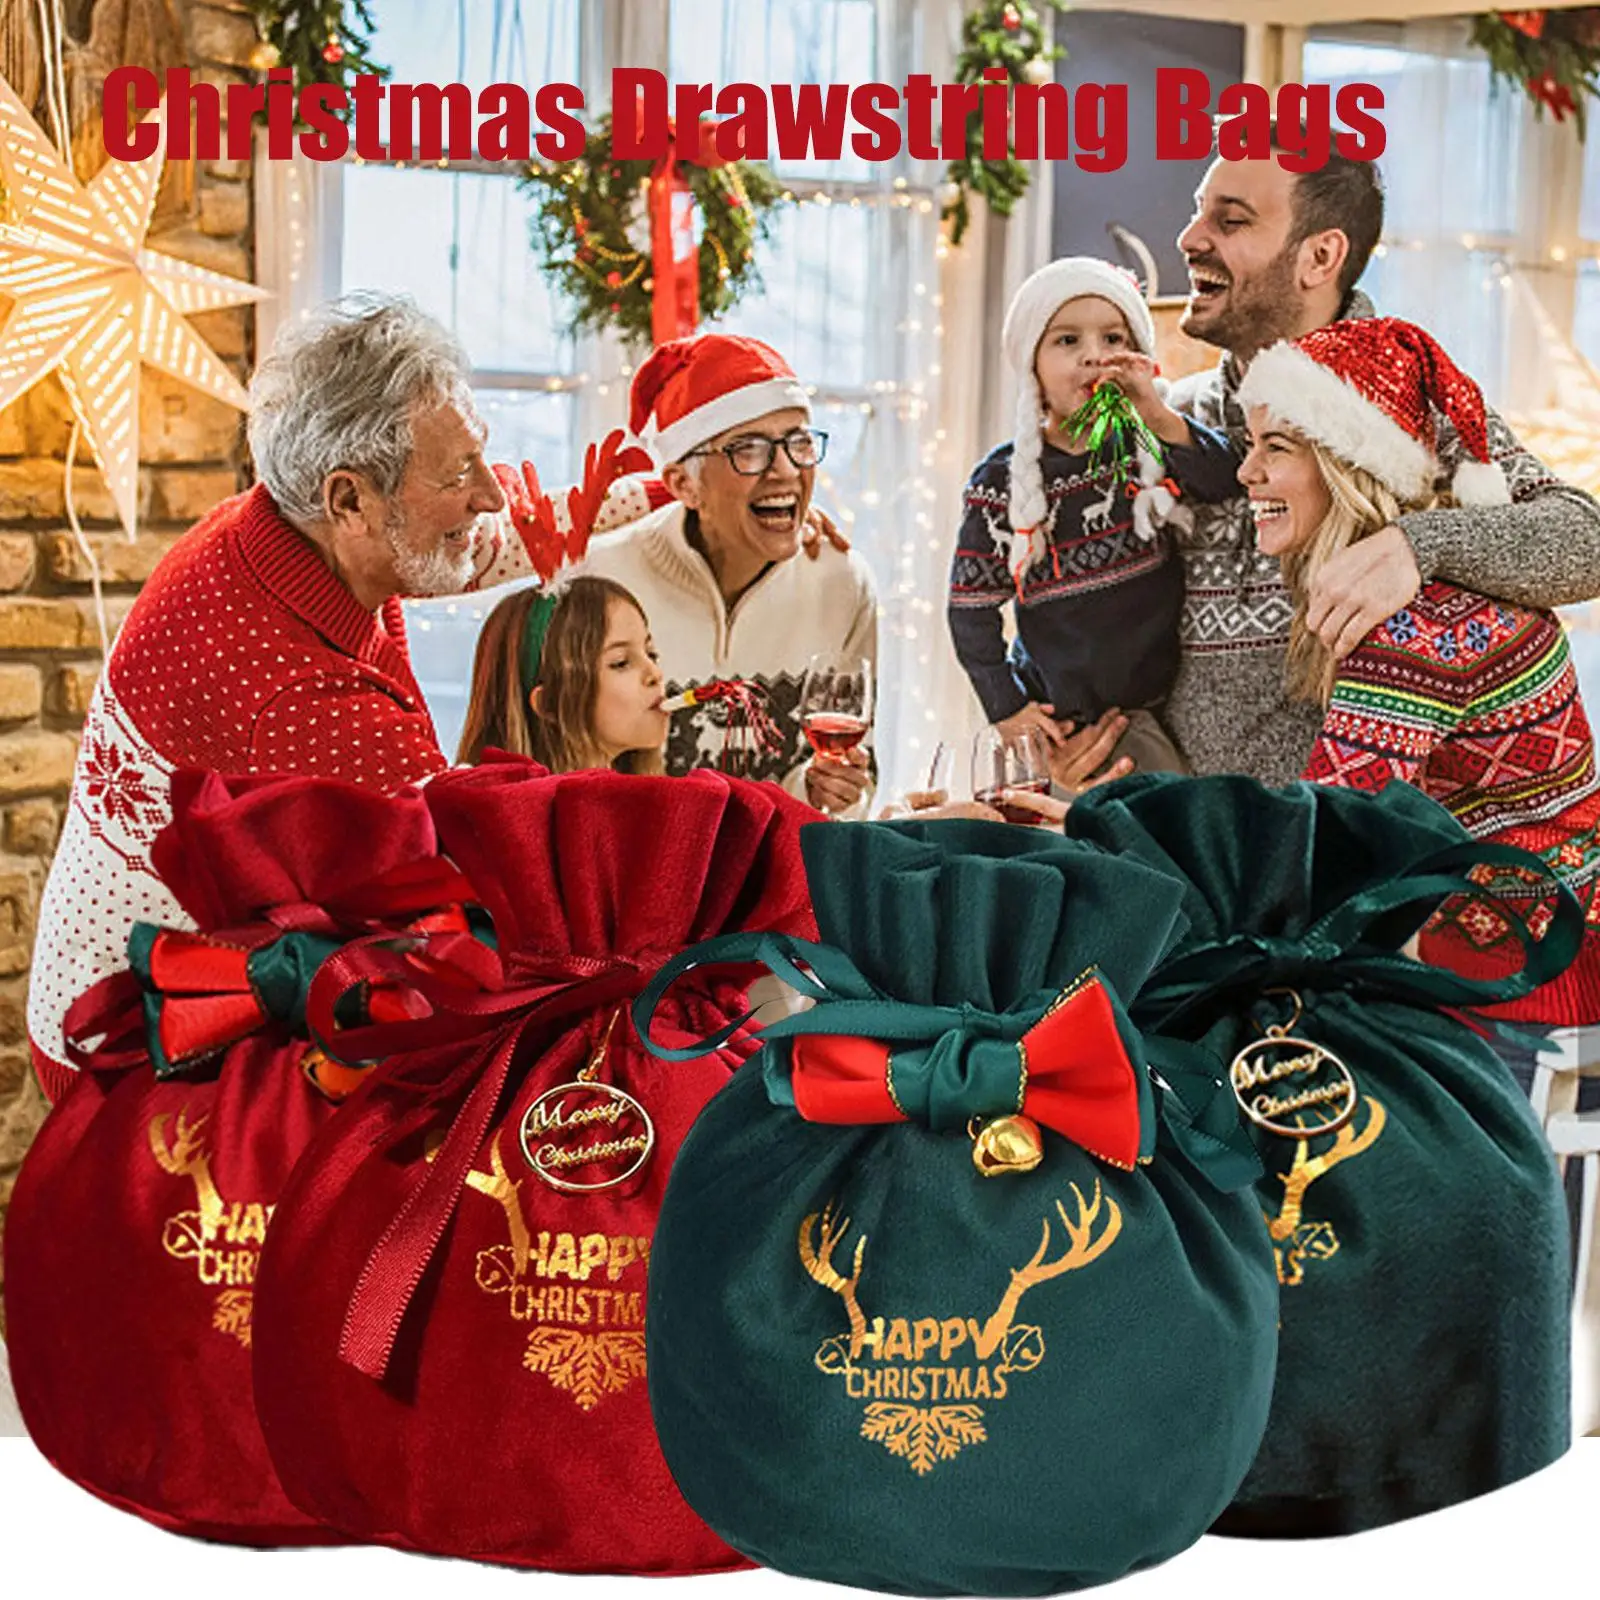 

Christmas Gift Bags Velvet Drawstring Presents Elk Antlers Reindeer Packing Bags for Xmas Party Favor Wrapping Decor O8A1